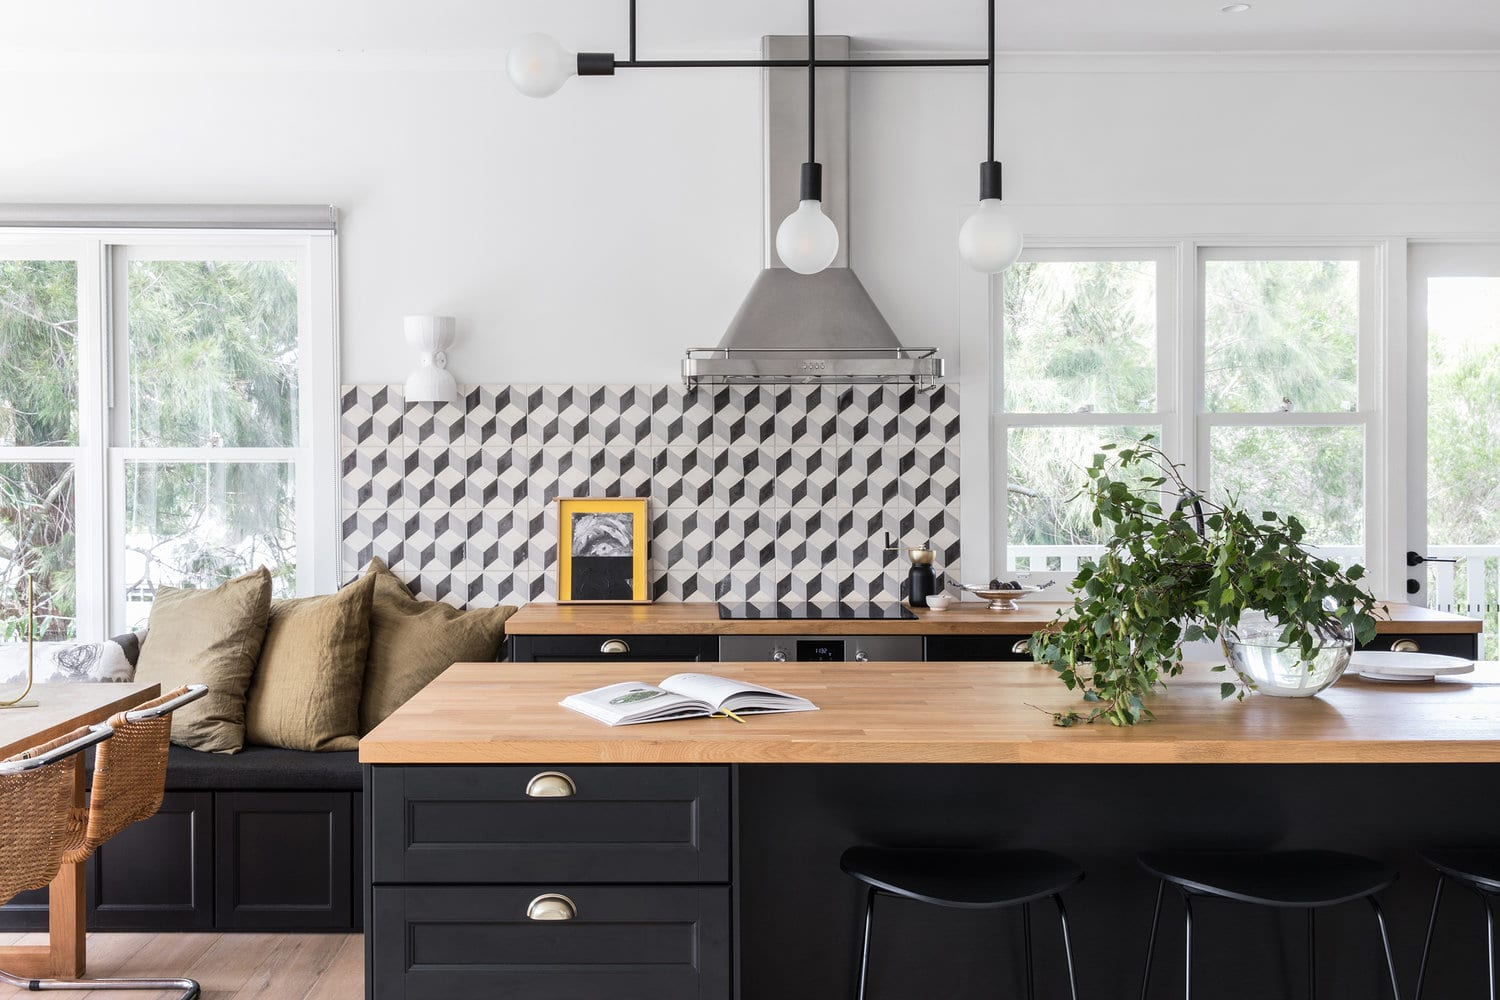 graphic black and white tile backsplash in a modern kitchen | house tour on coco kelley